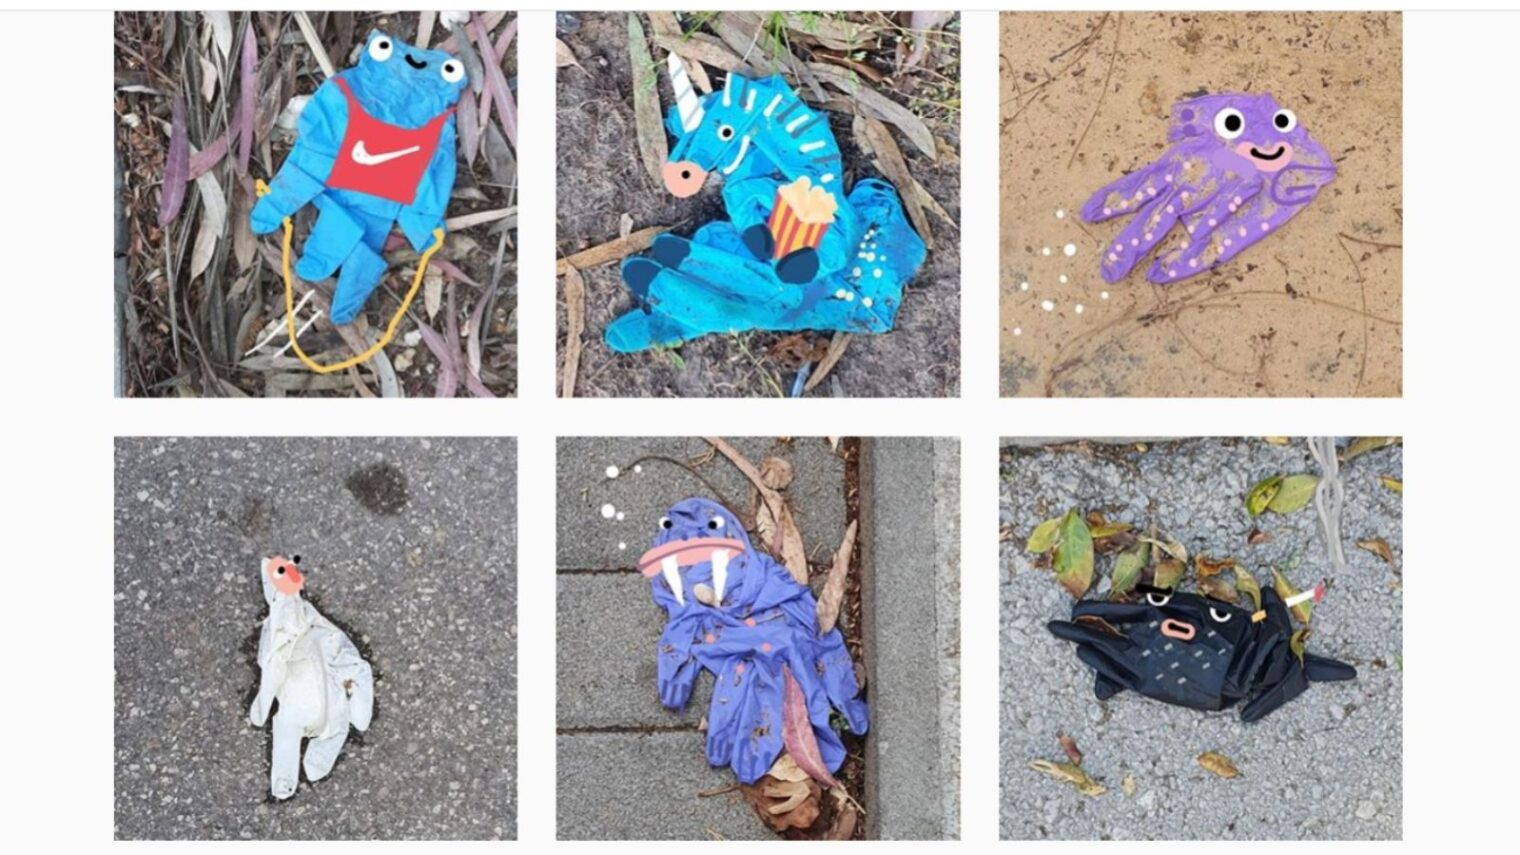 Yoav Gati’s Glove Stories characters begin with discarded disposable gloves he finds. Photo via @glove.stories